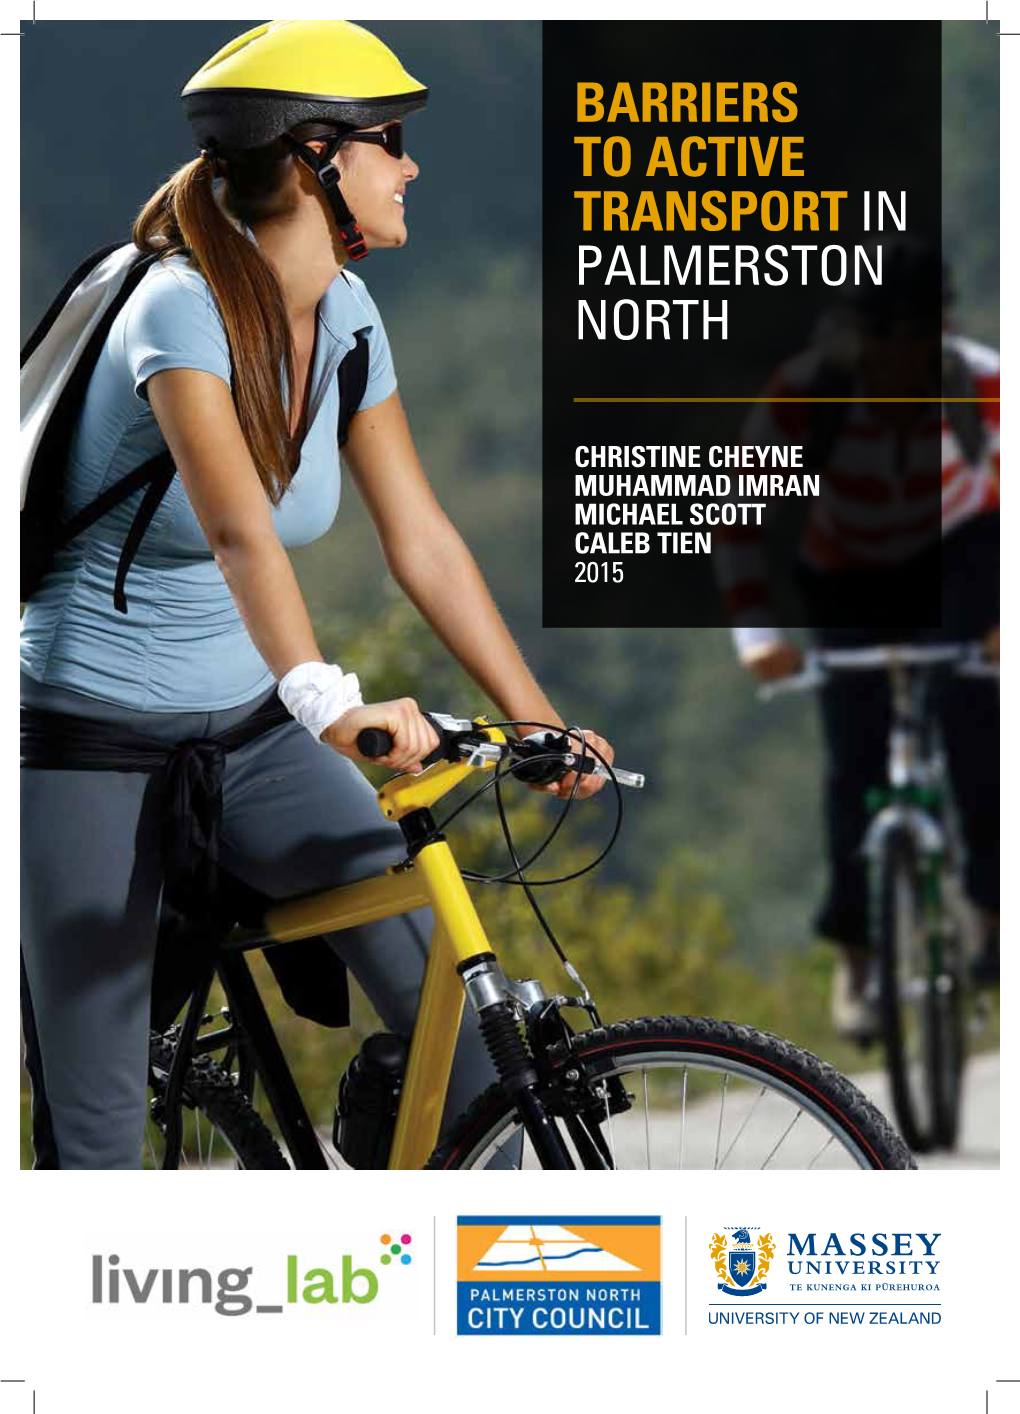 Barriers to Active Transport in Palmerston North